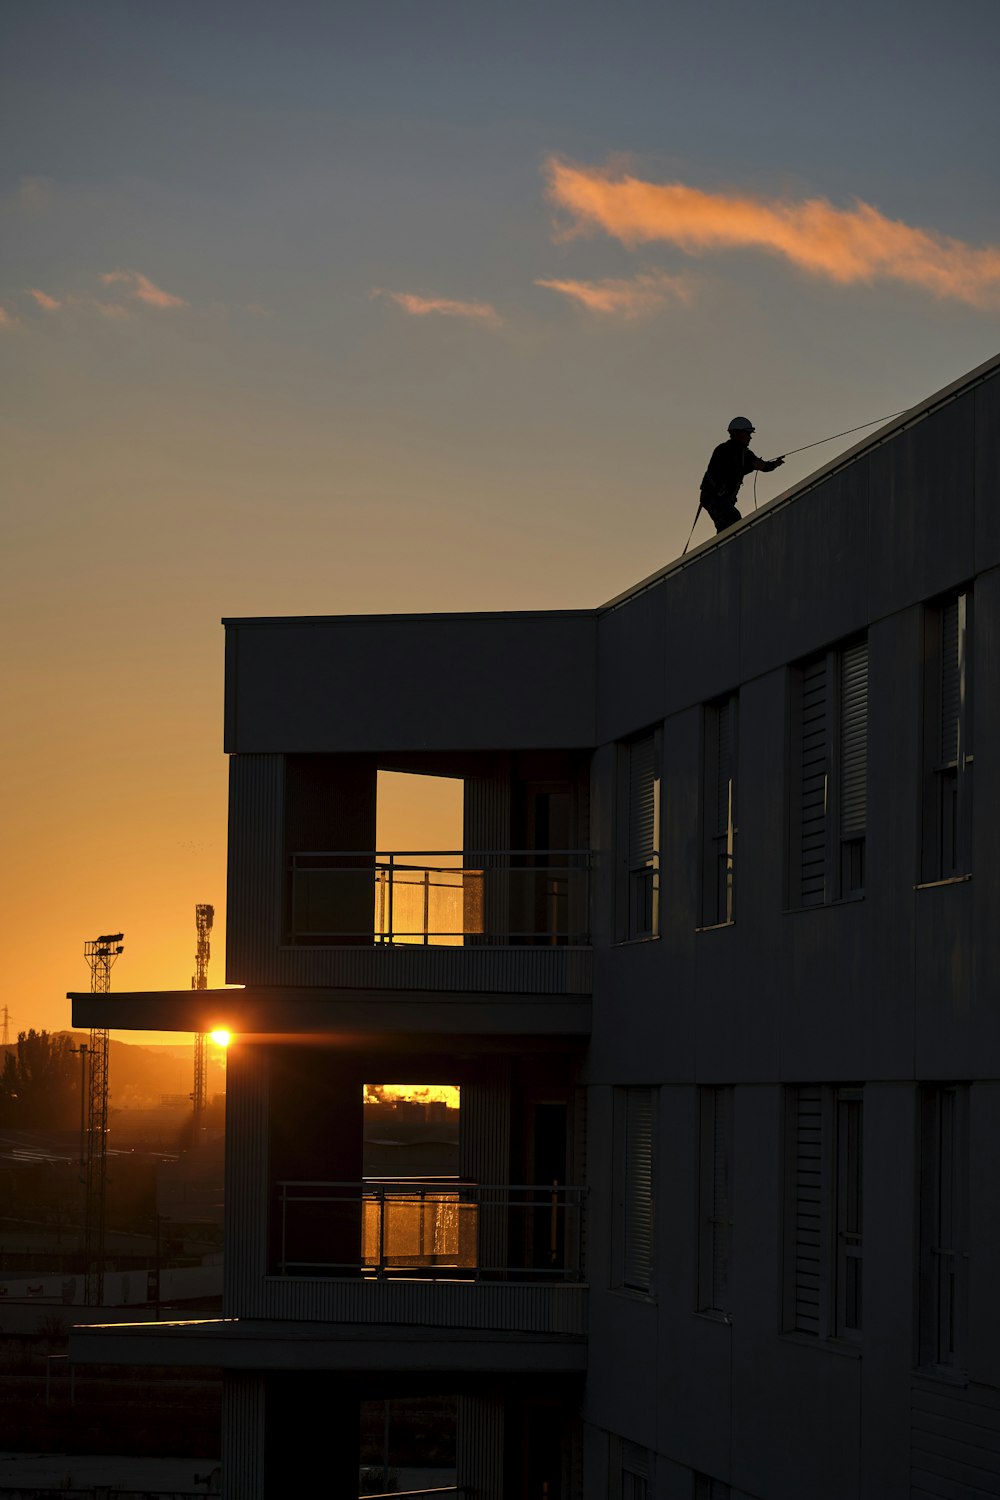 a person on a roof with the sun setting in the background